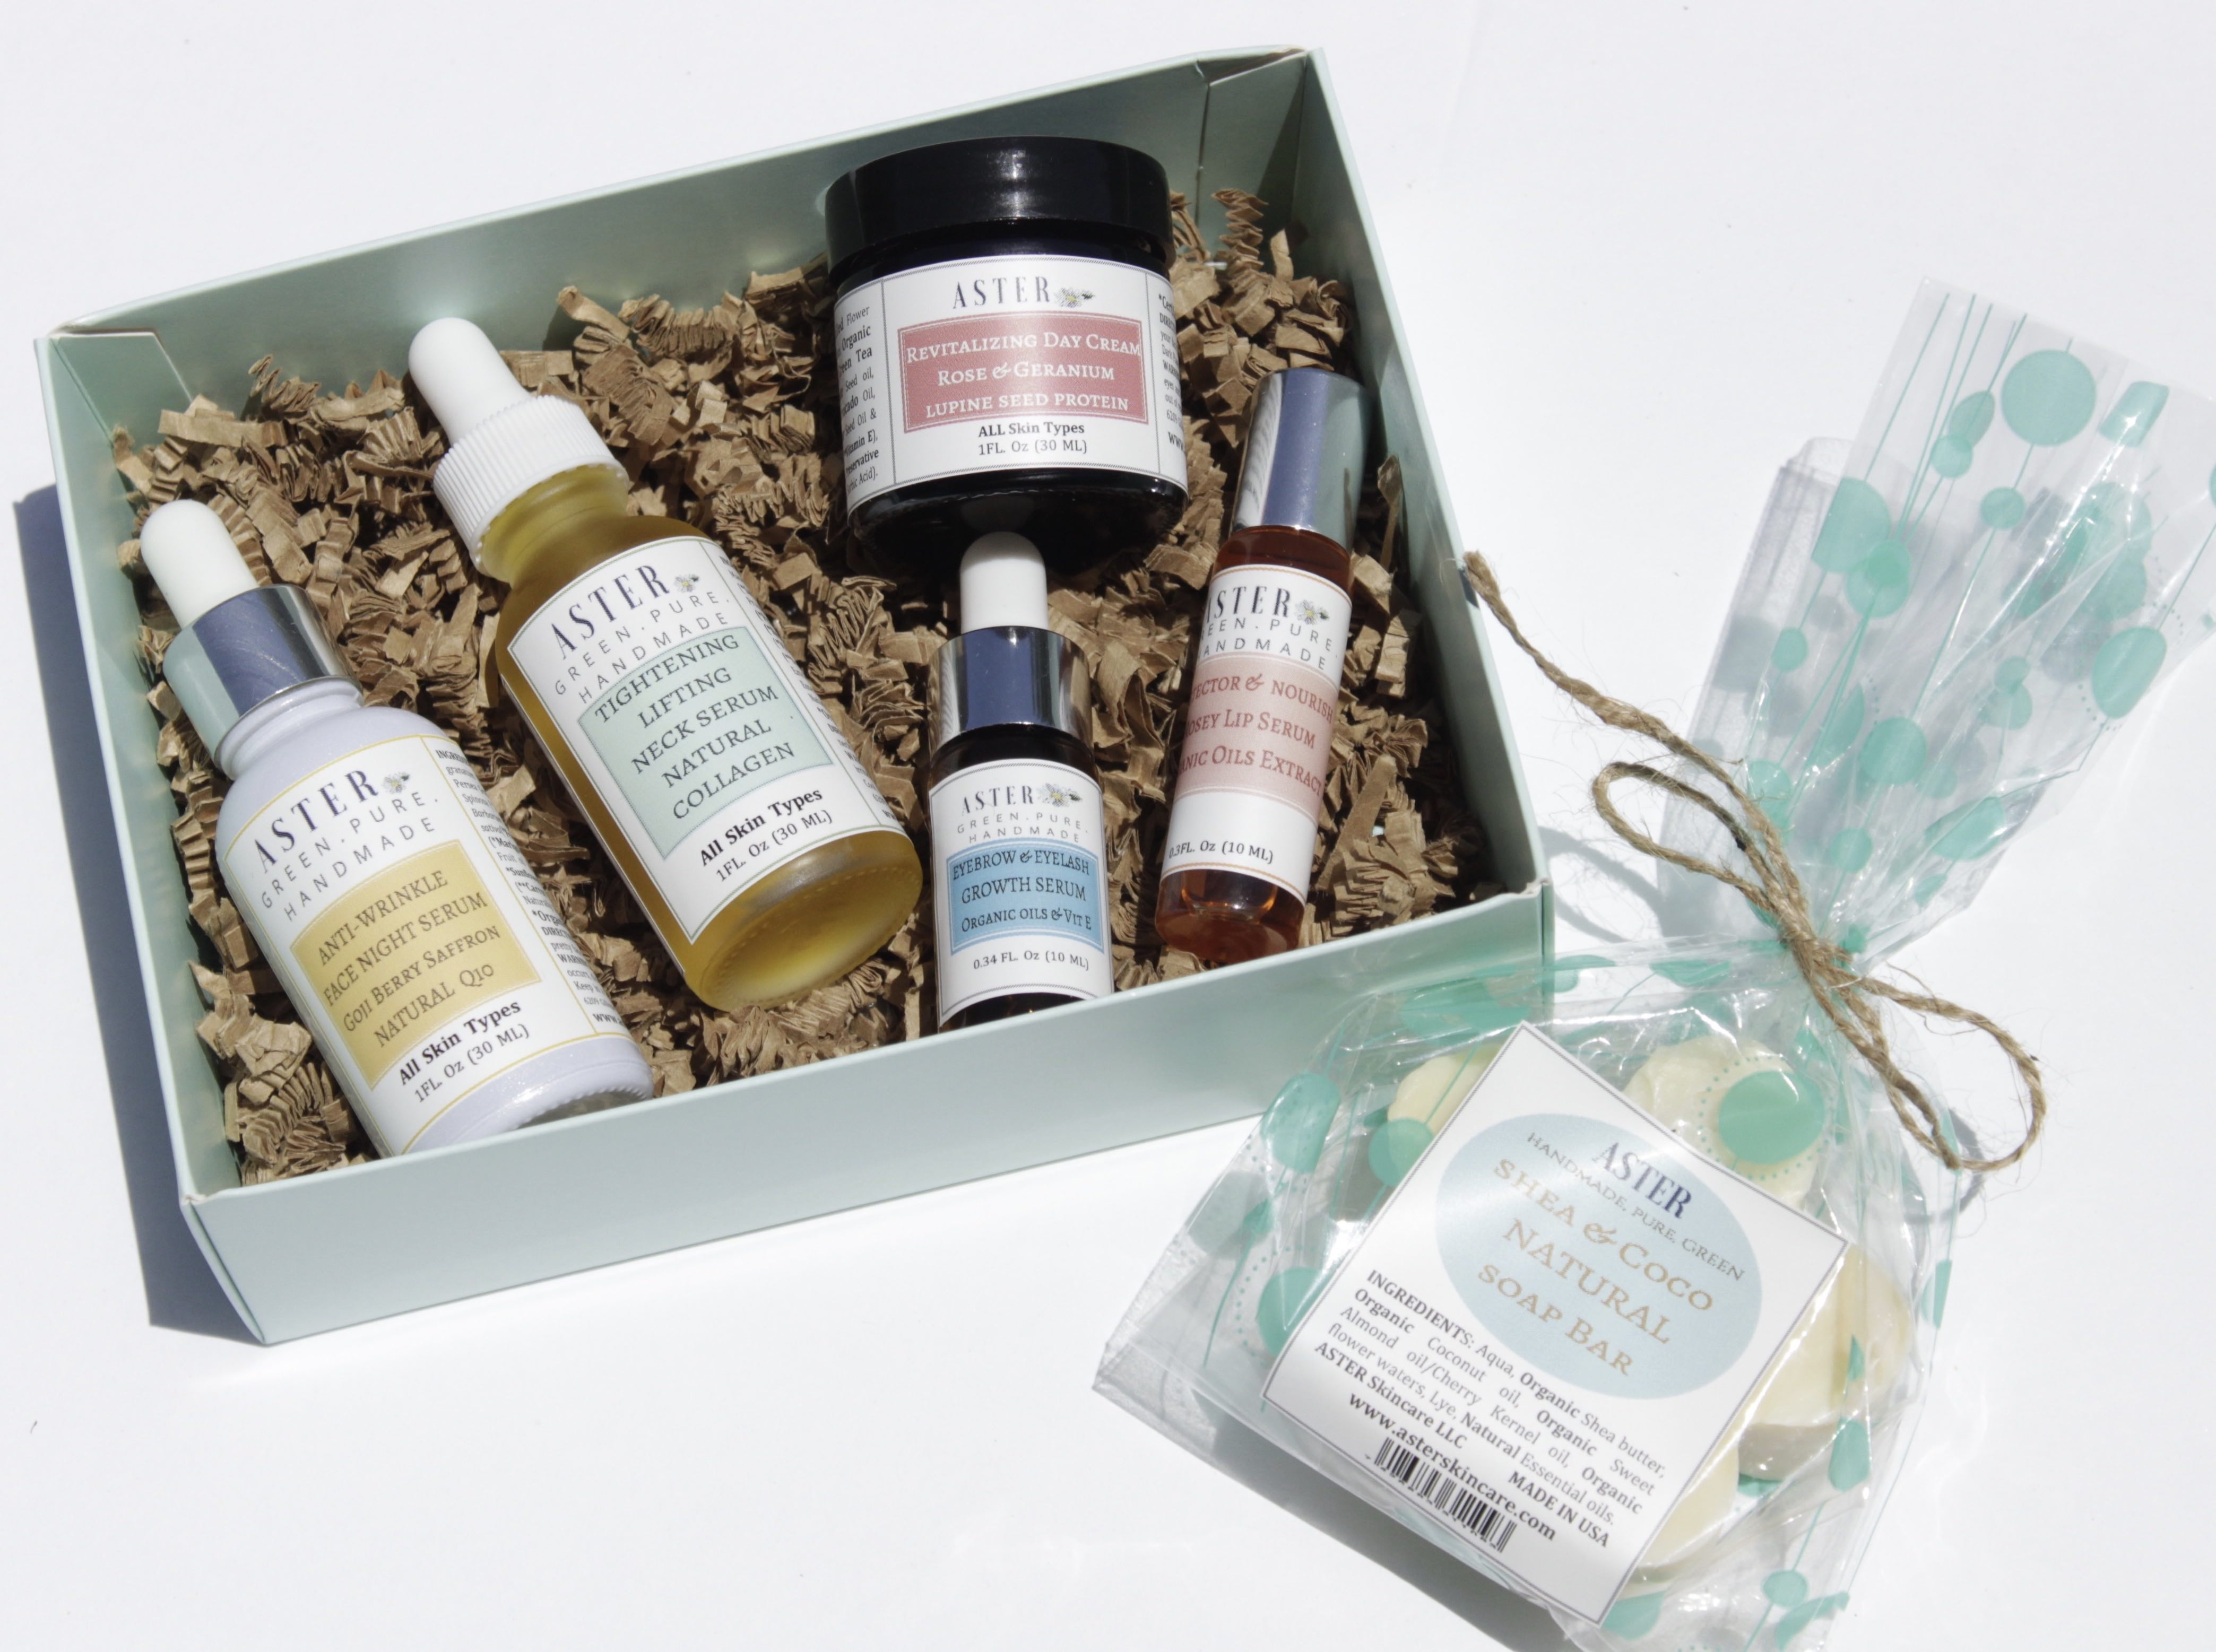 Monthly Aster Care Box - Anti-Aging, High Antioxidant & Super Nourishing - OVER $150 VALUE - ALL Skin Types!